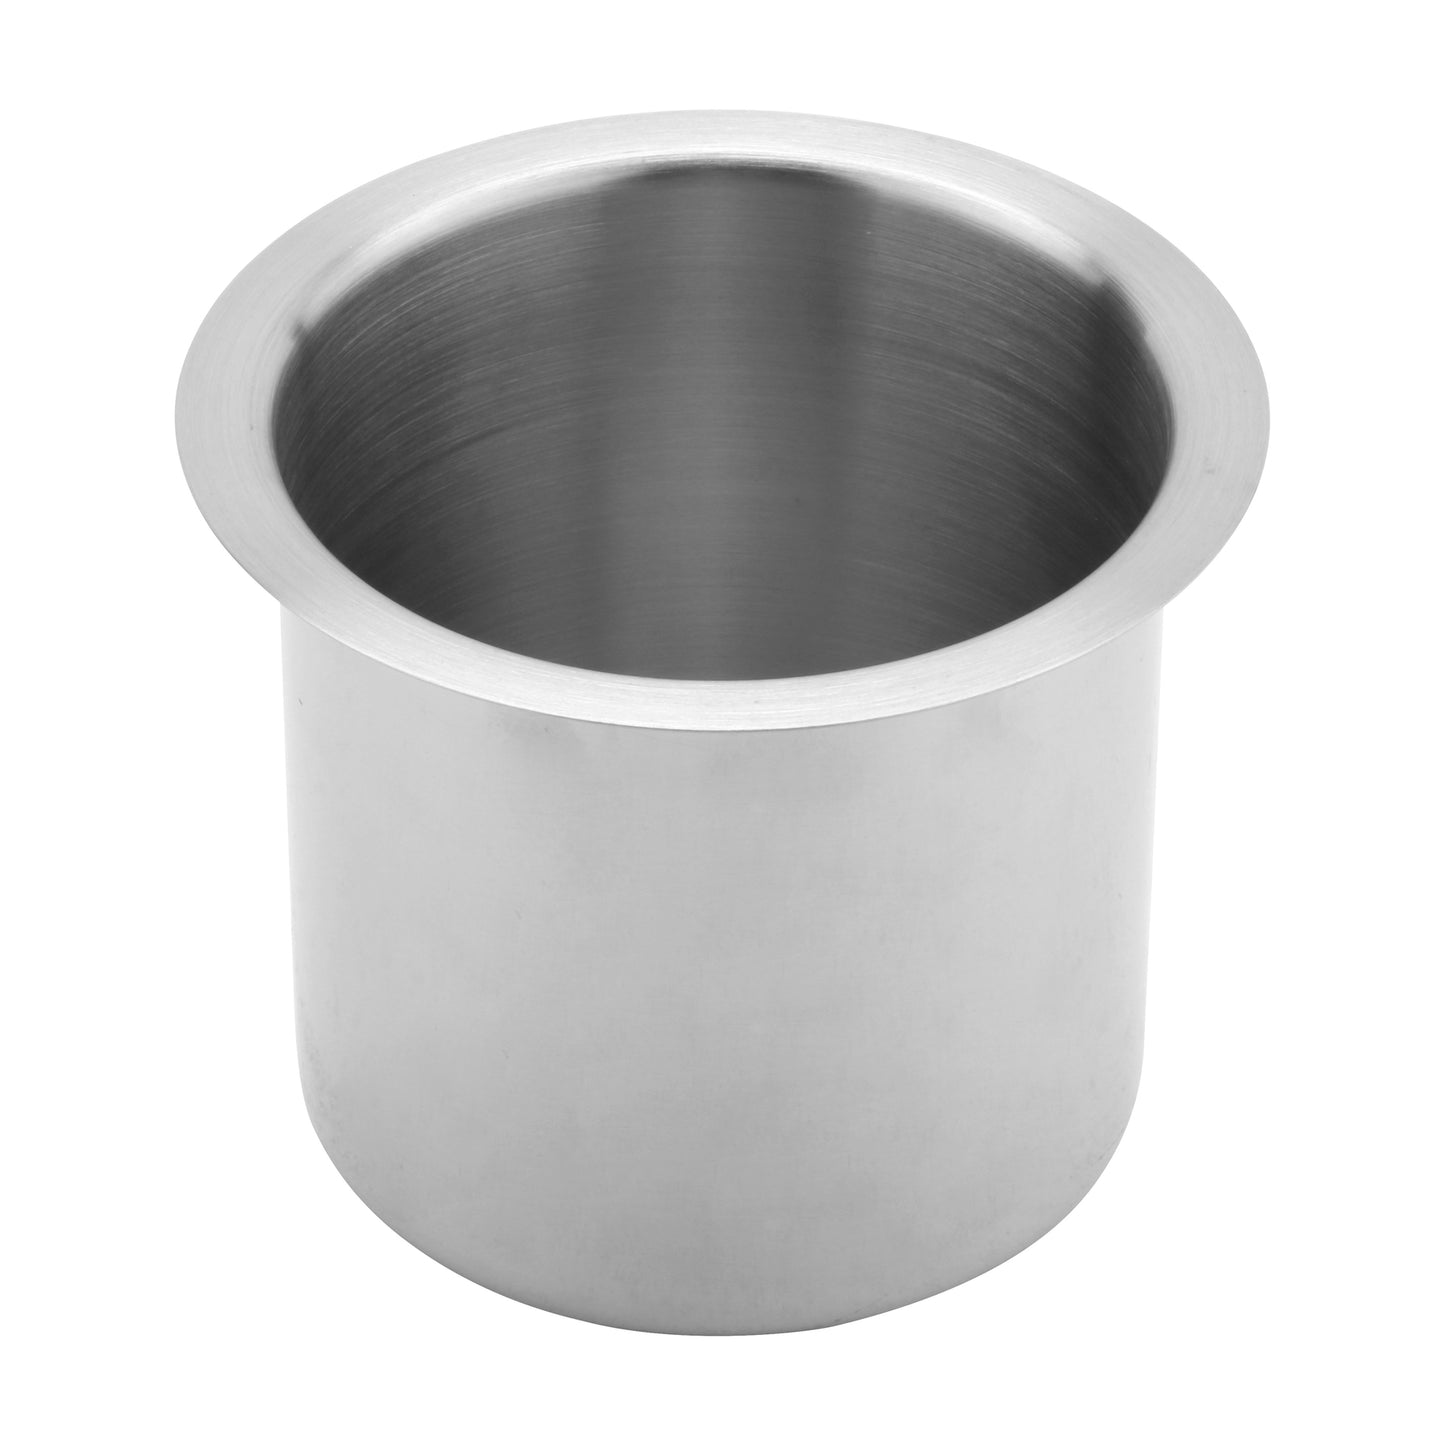 24 oz. 5" Stainless Steel Bowl, 4" tall (For SSLS-01)